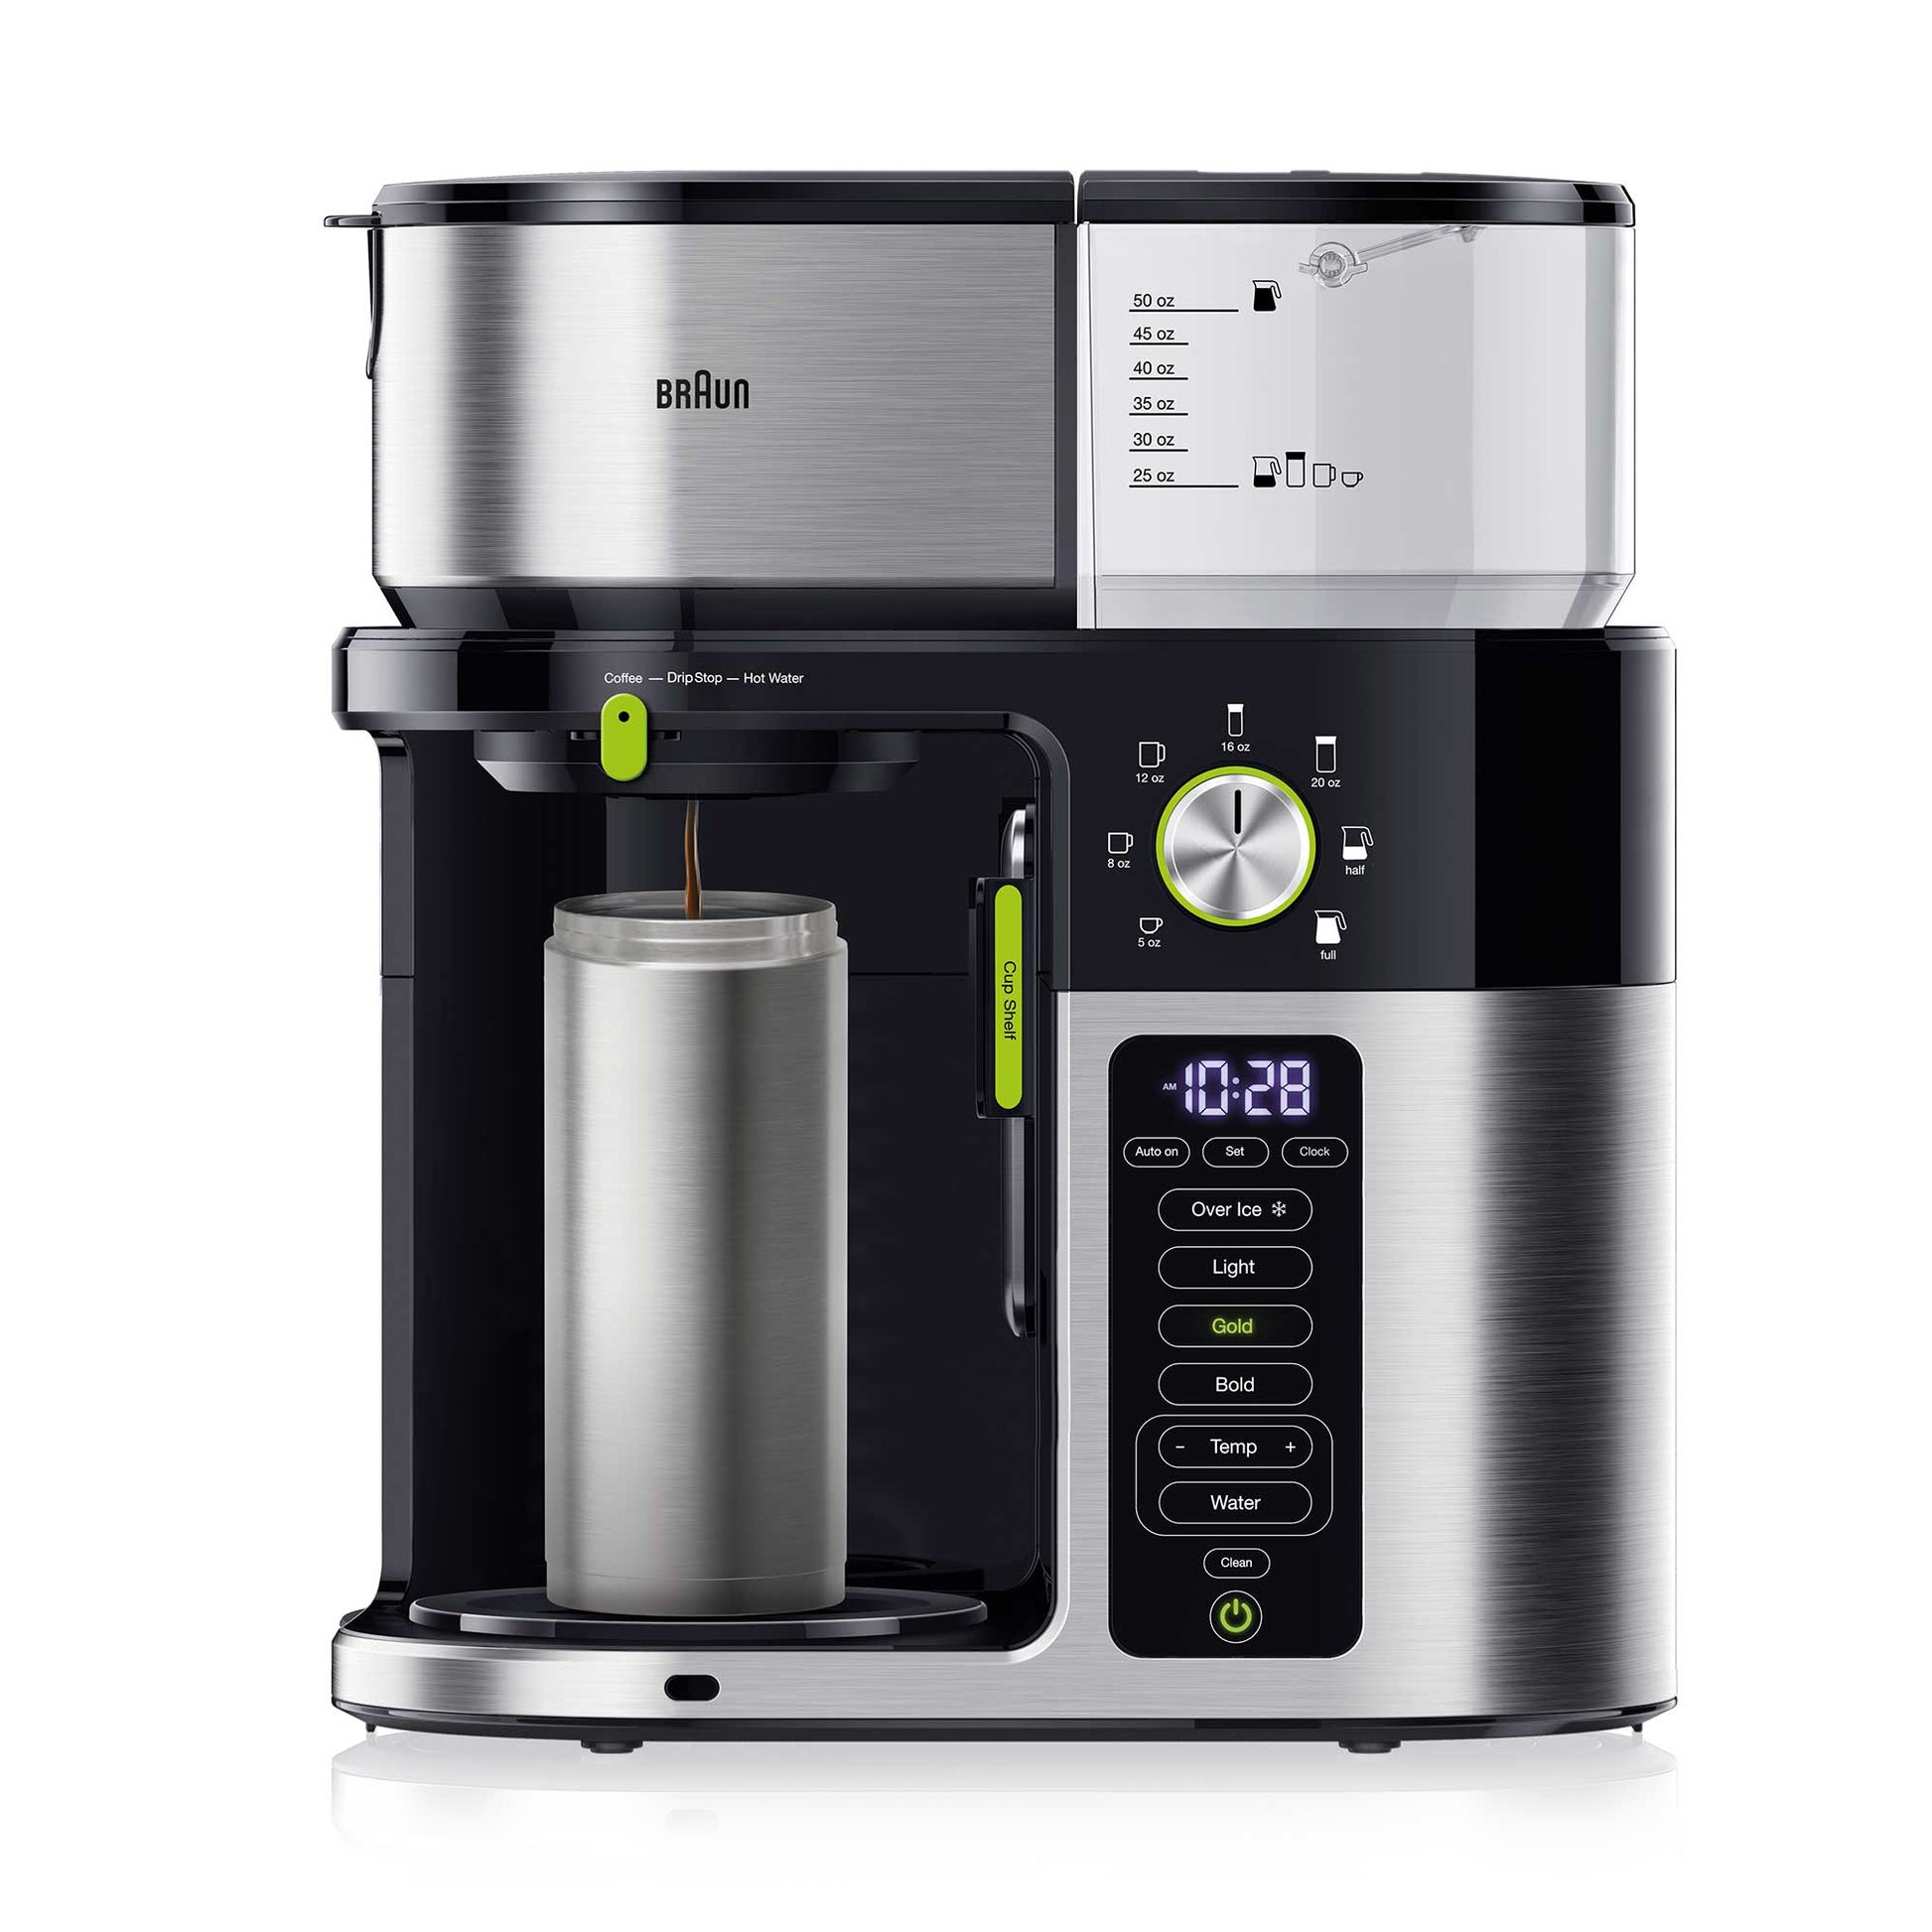 Automating Mornings: Braun MultiServe Coffee Maker Review - C'est